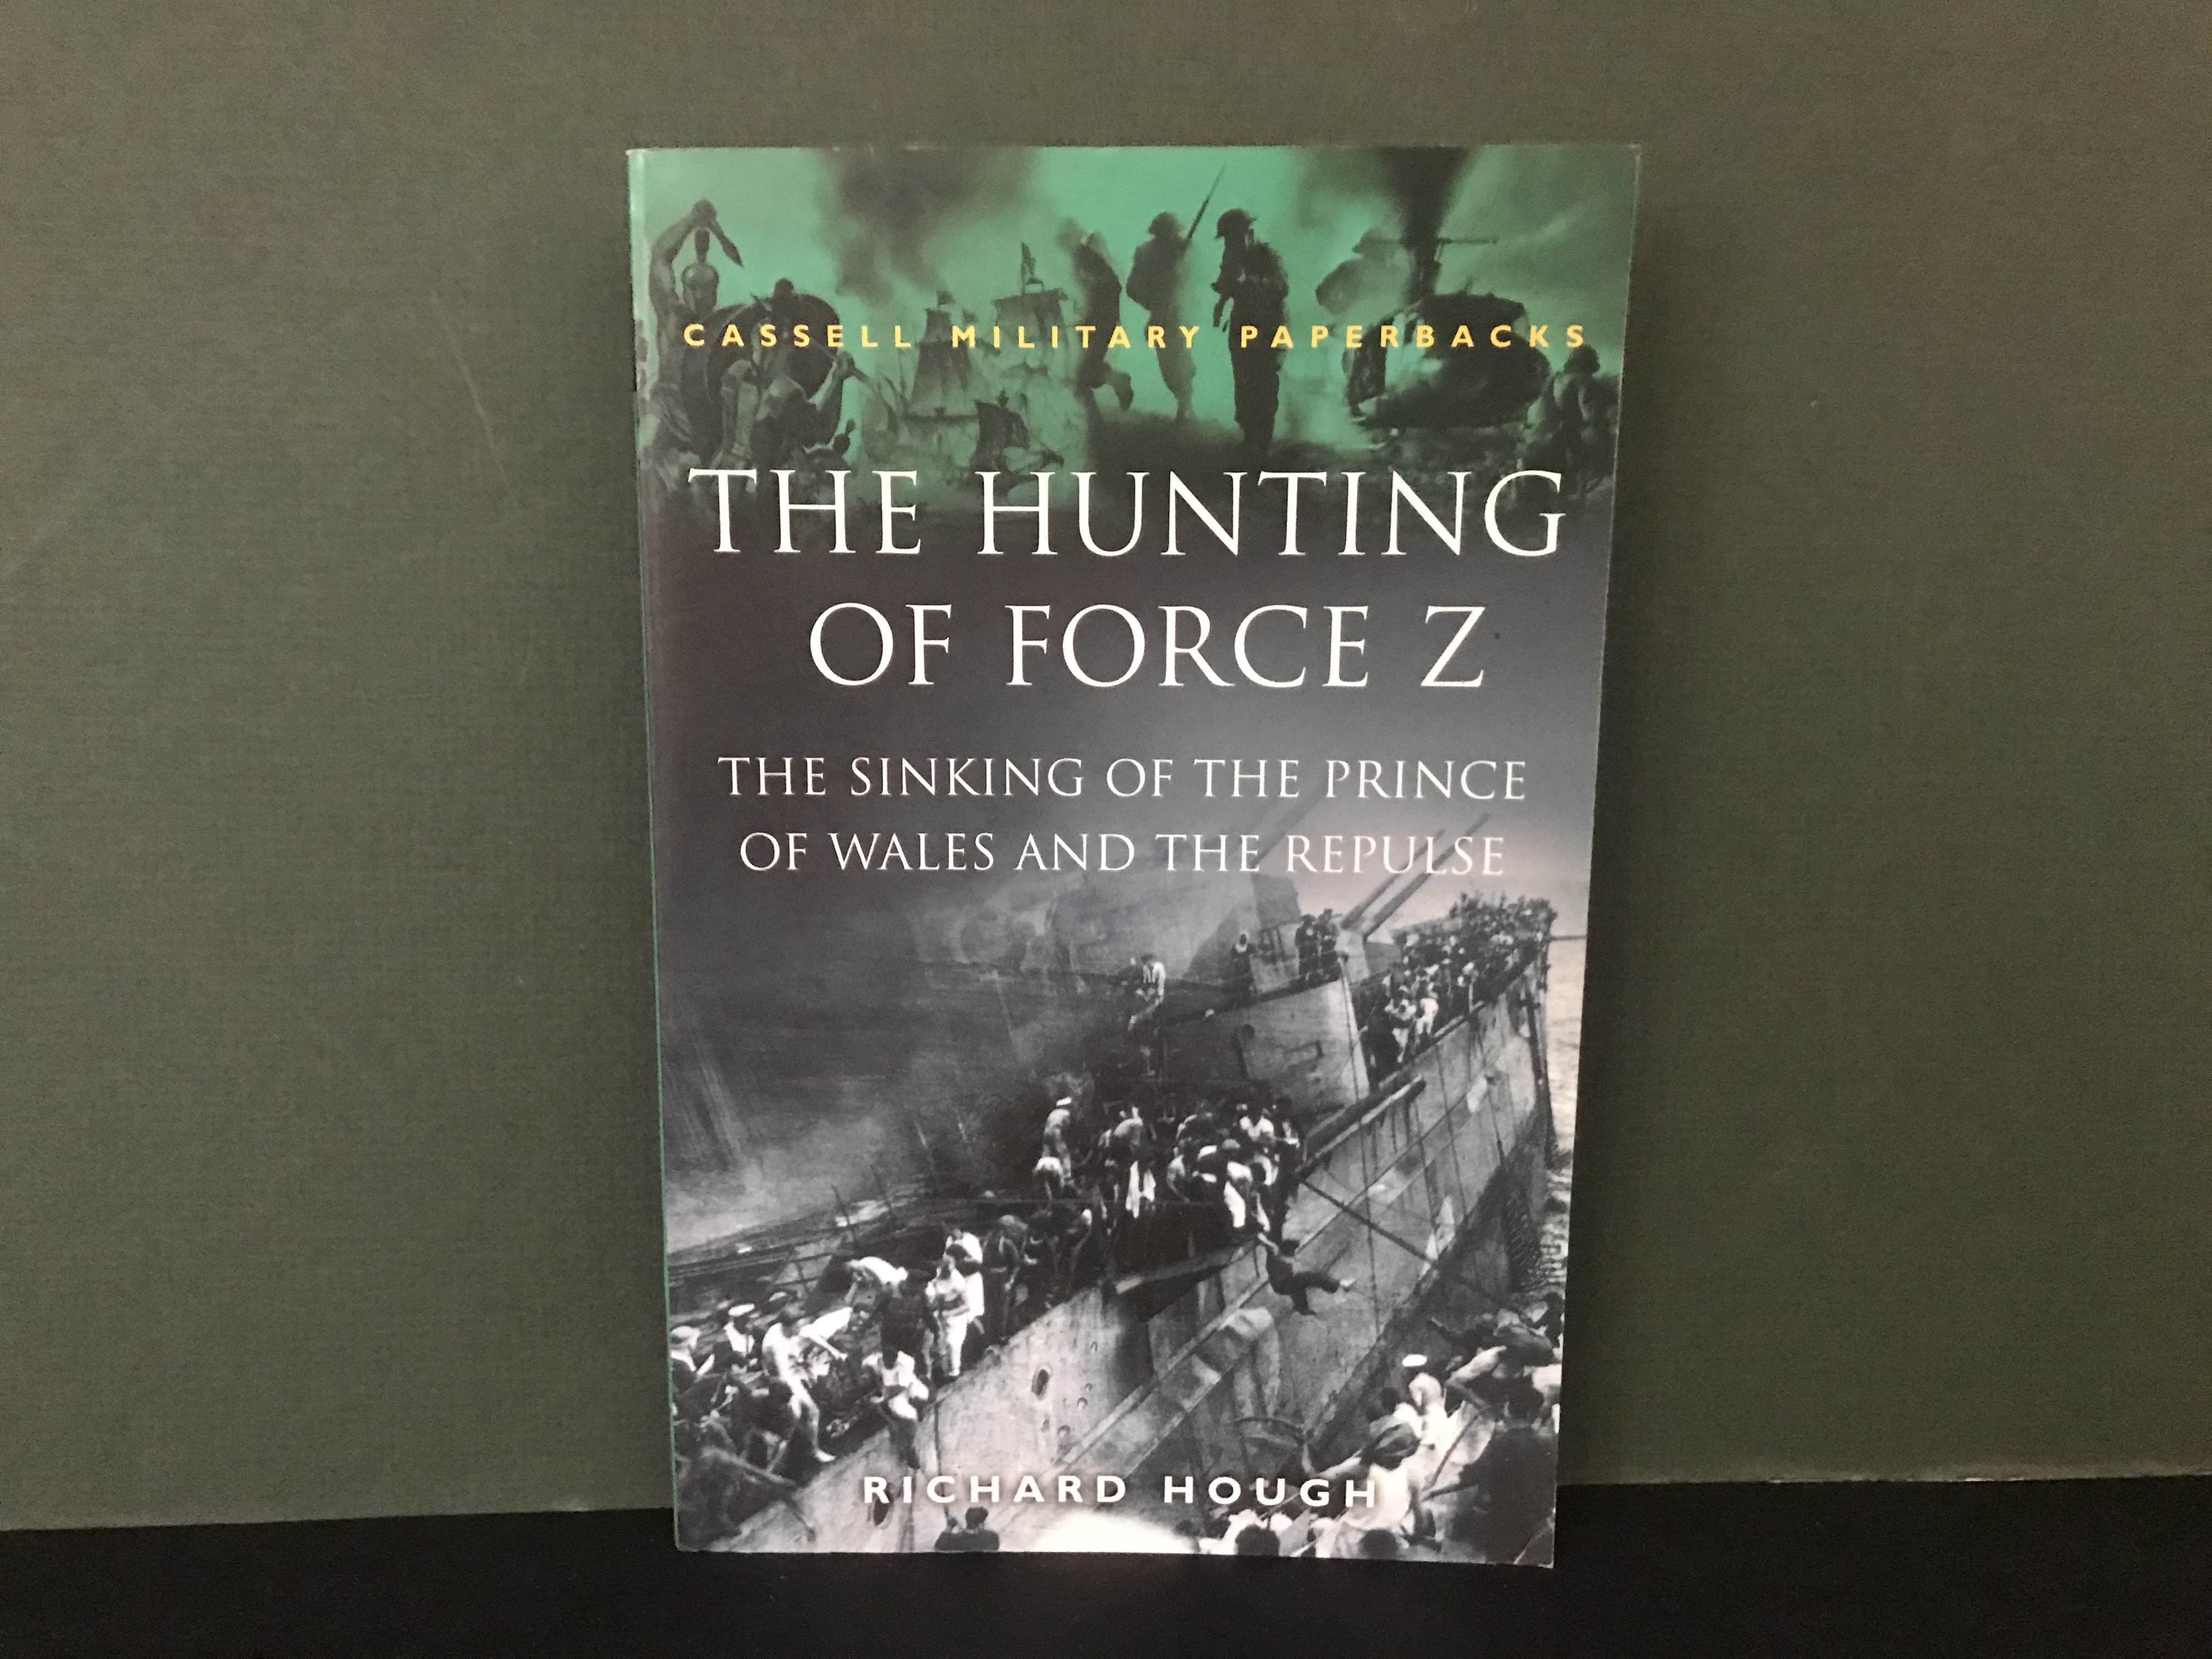 The Hunting of Force Z: The Sinking of the Prince of Wales and the Repulse (Cassell Military Paperbacks) - Hough, Richard